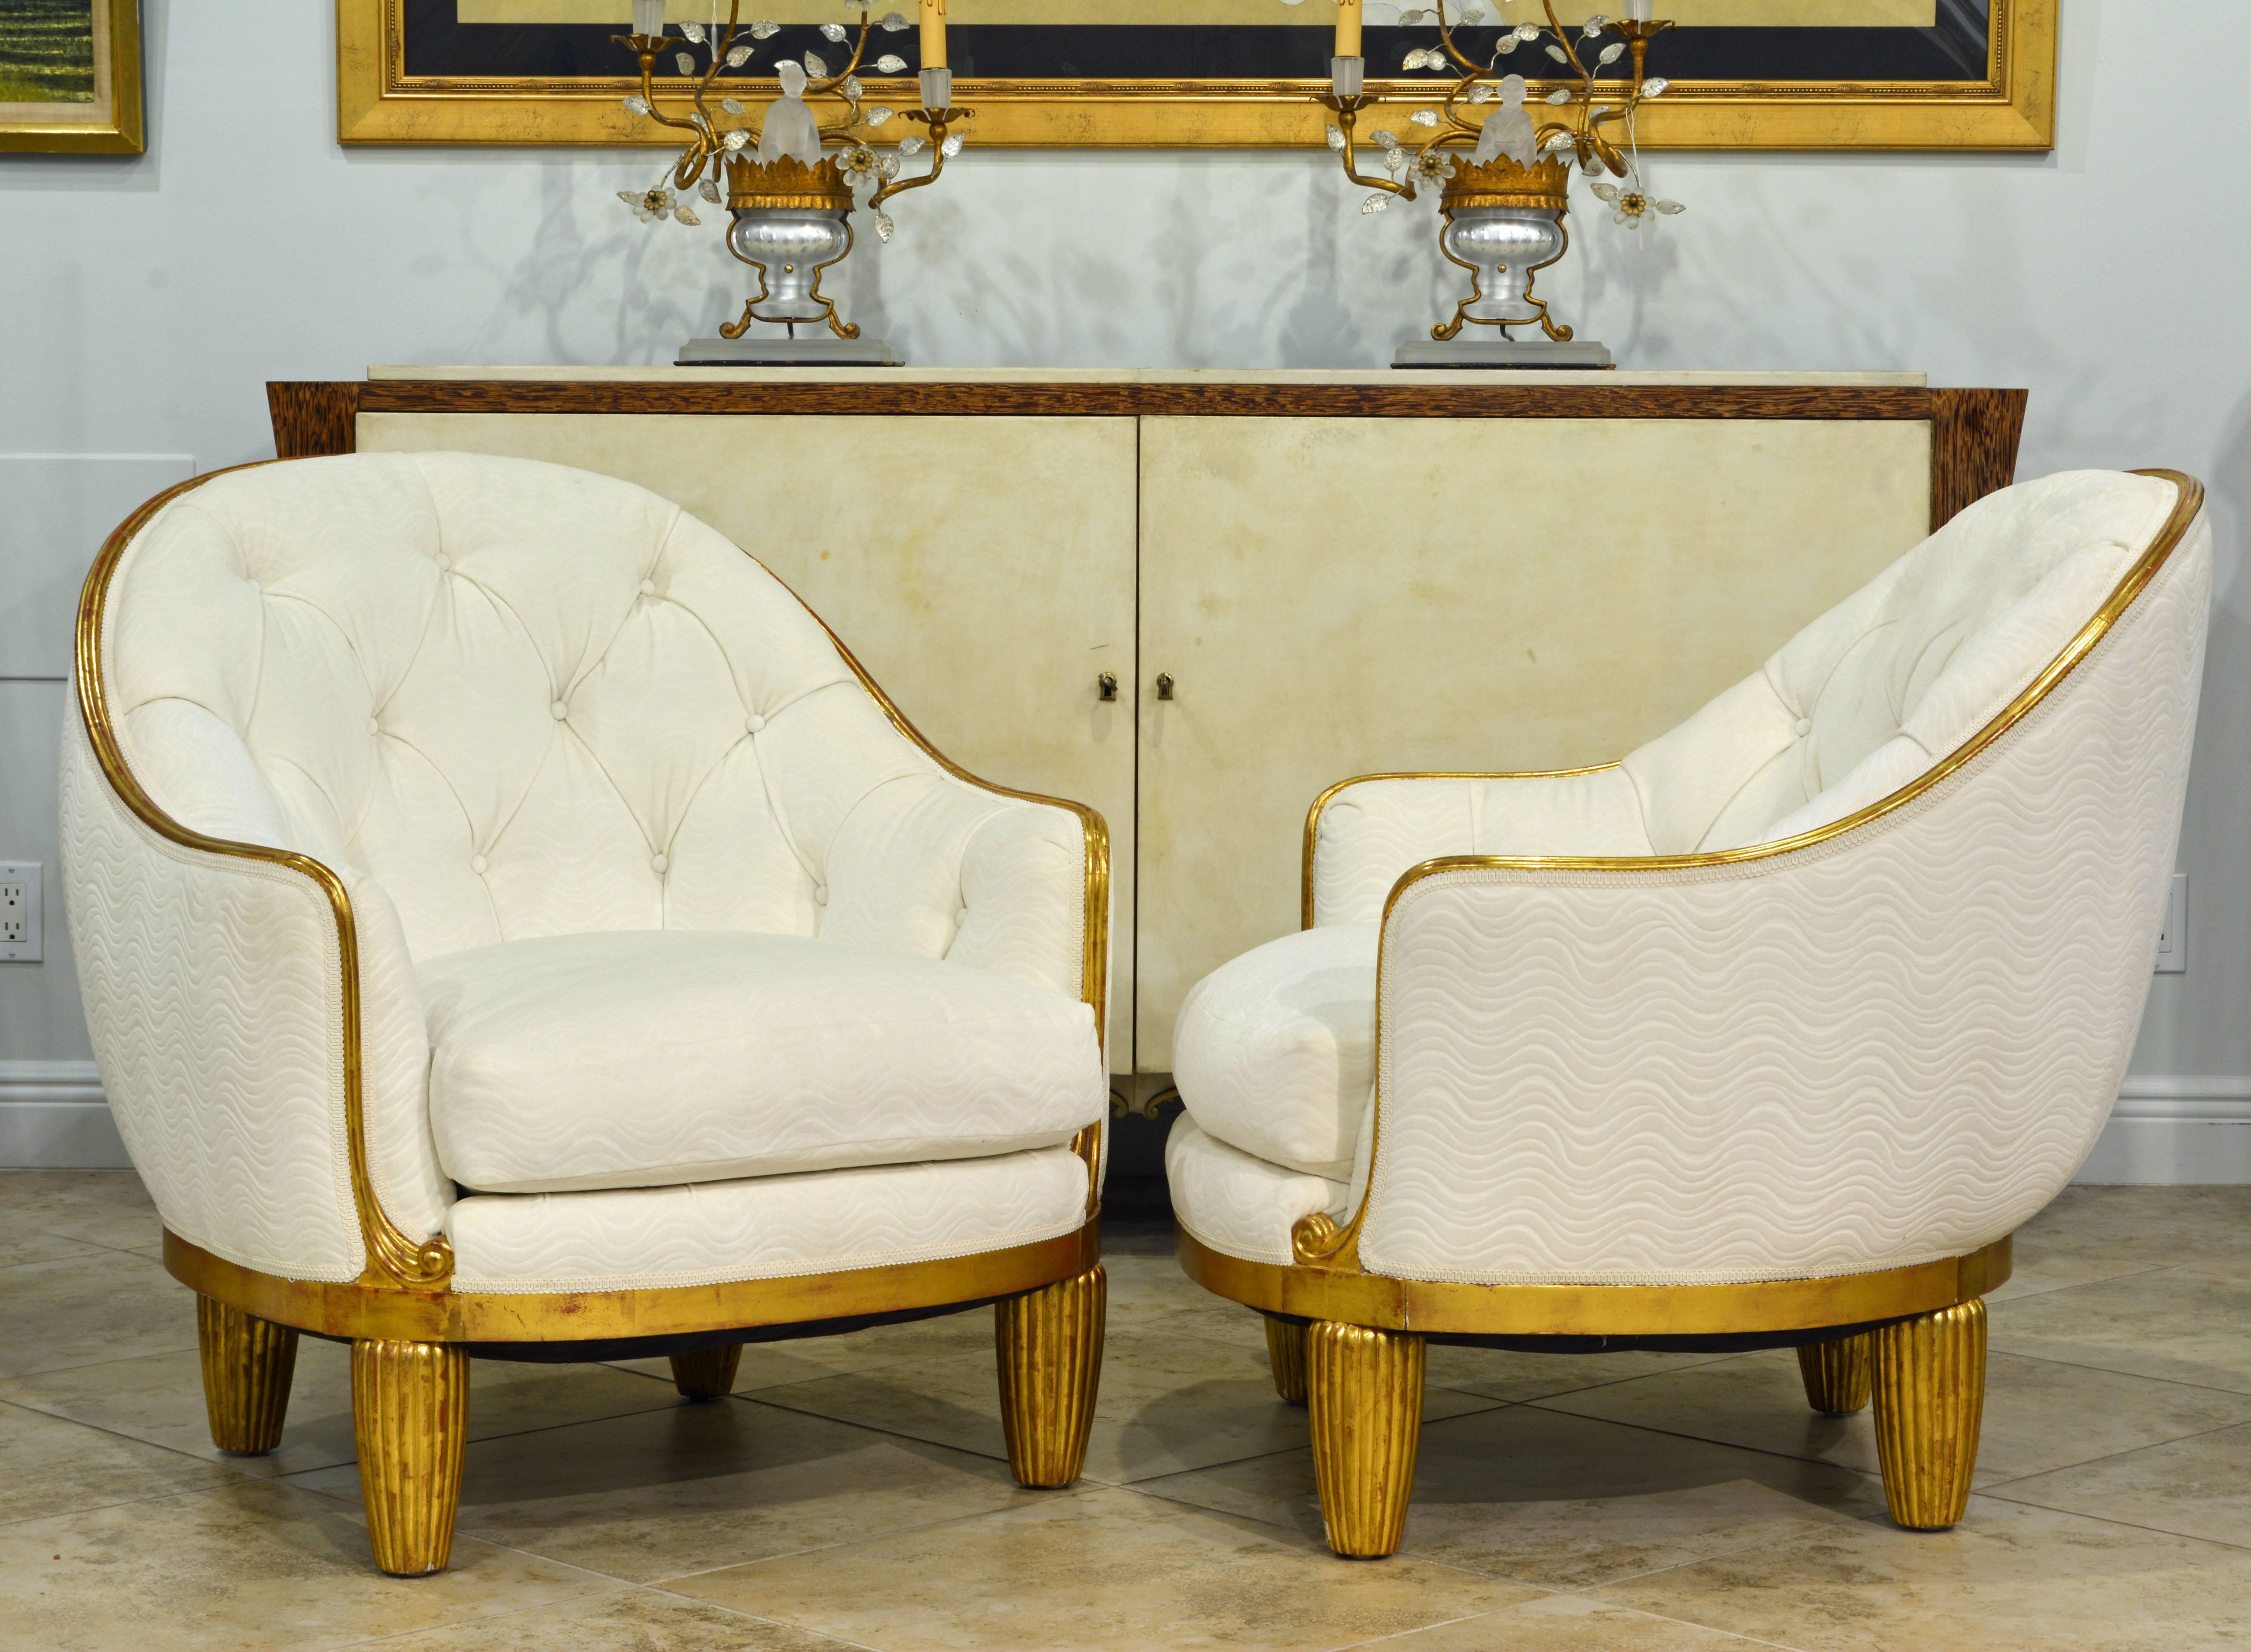 Gently restored to their original glory these wonderful lounge chairs or bergeres, in the style of the legendary furniture designer Maurice Dufrene, feature reeded conical legs typical of Dufrene and a narrow gilded frame in an elegant curvature